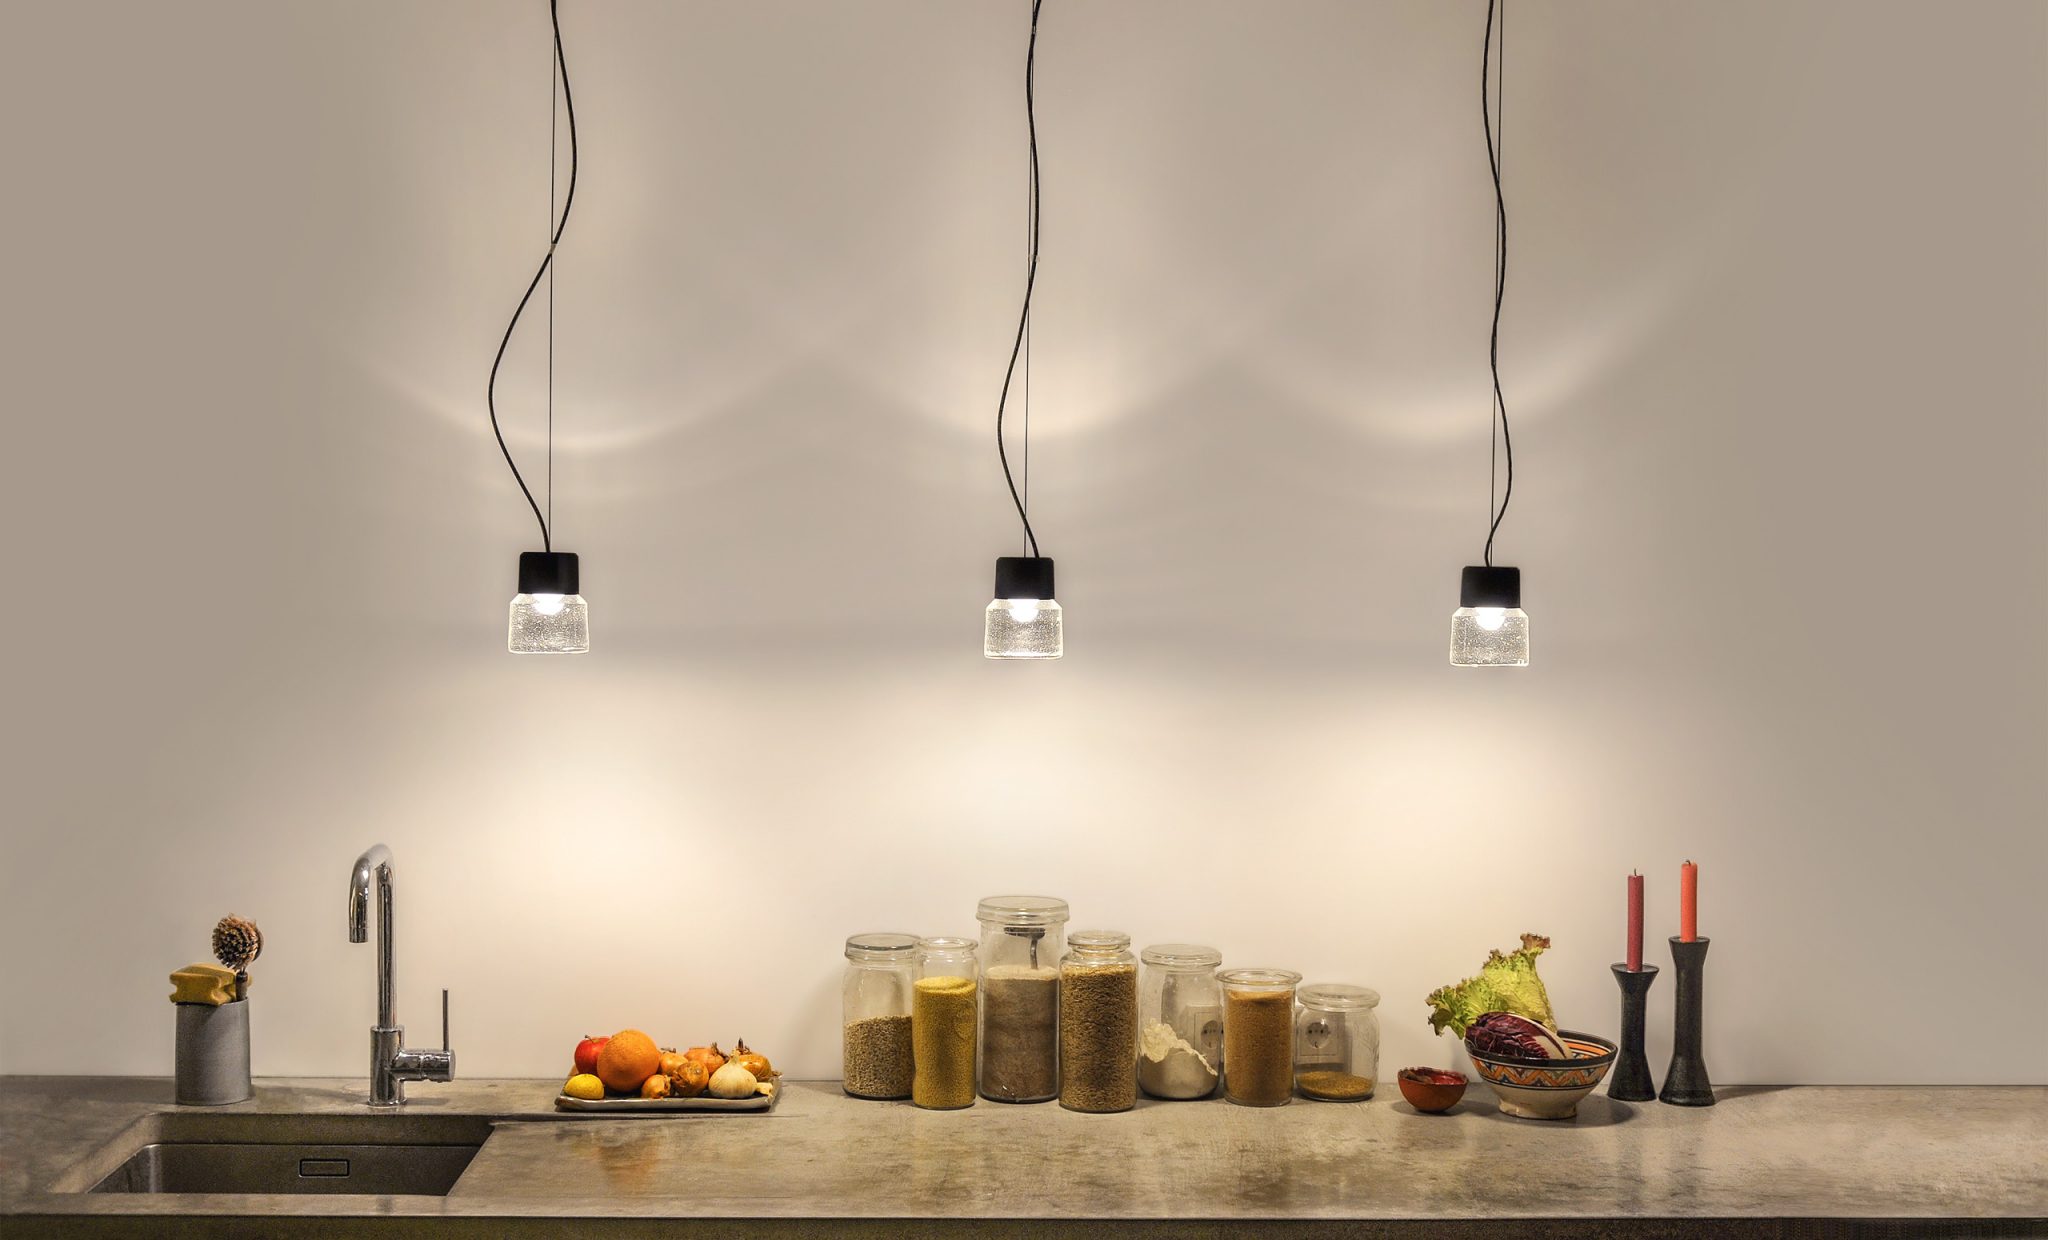 Cast LED pendant luminaire in cast glass and anodised aluminium in a group above the kitchen worktop.